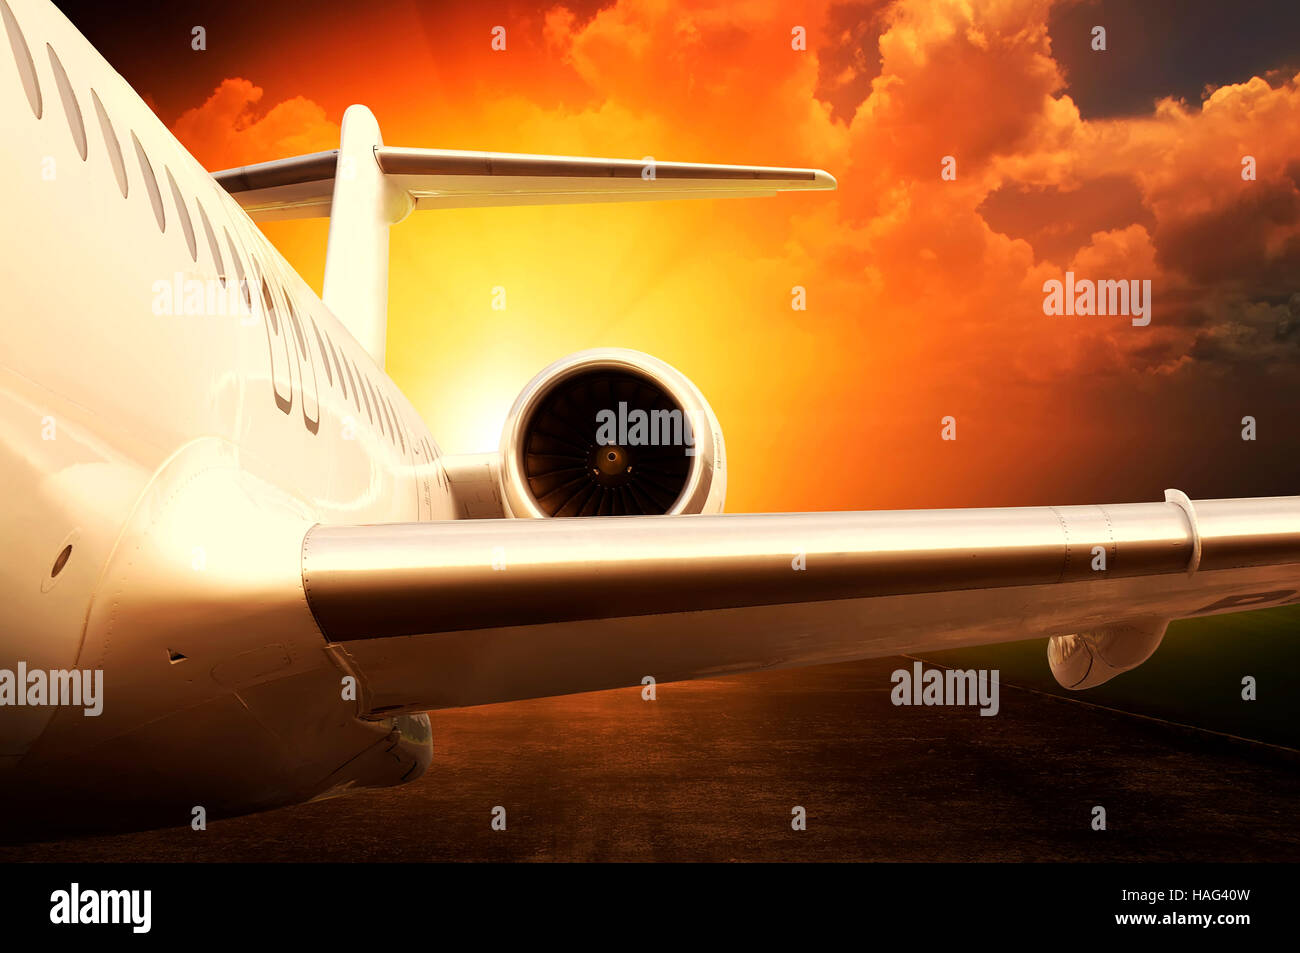 Jet engine on parked airplane over sunset background Stock Photo